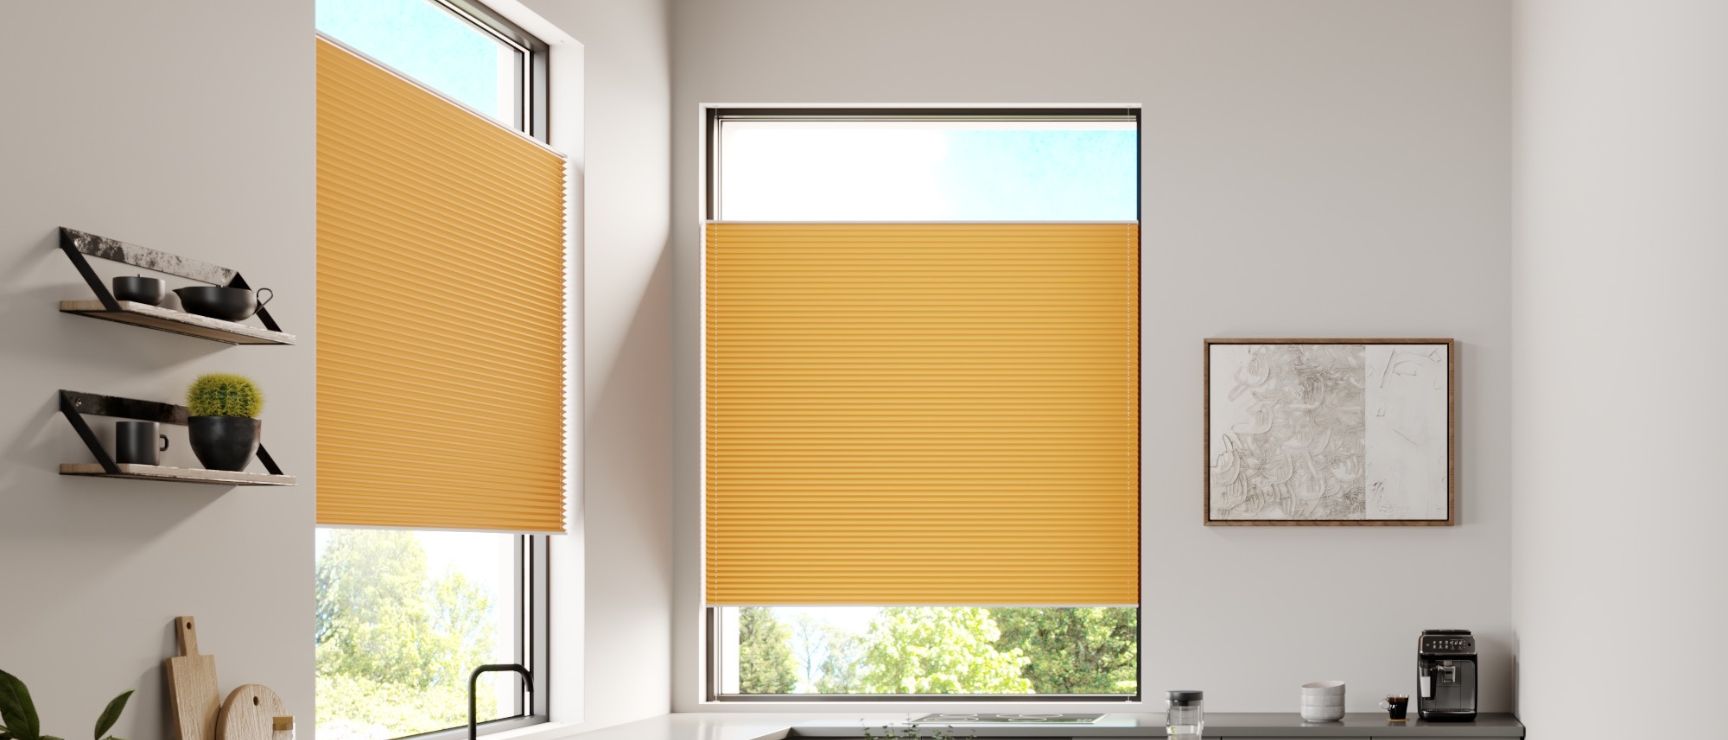 What are 'solar' blinds?